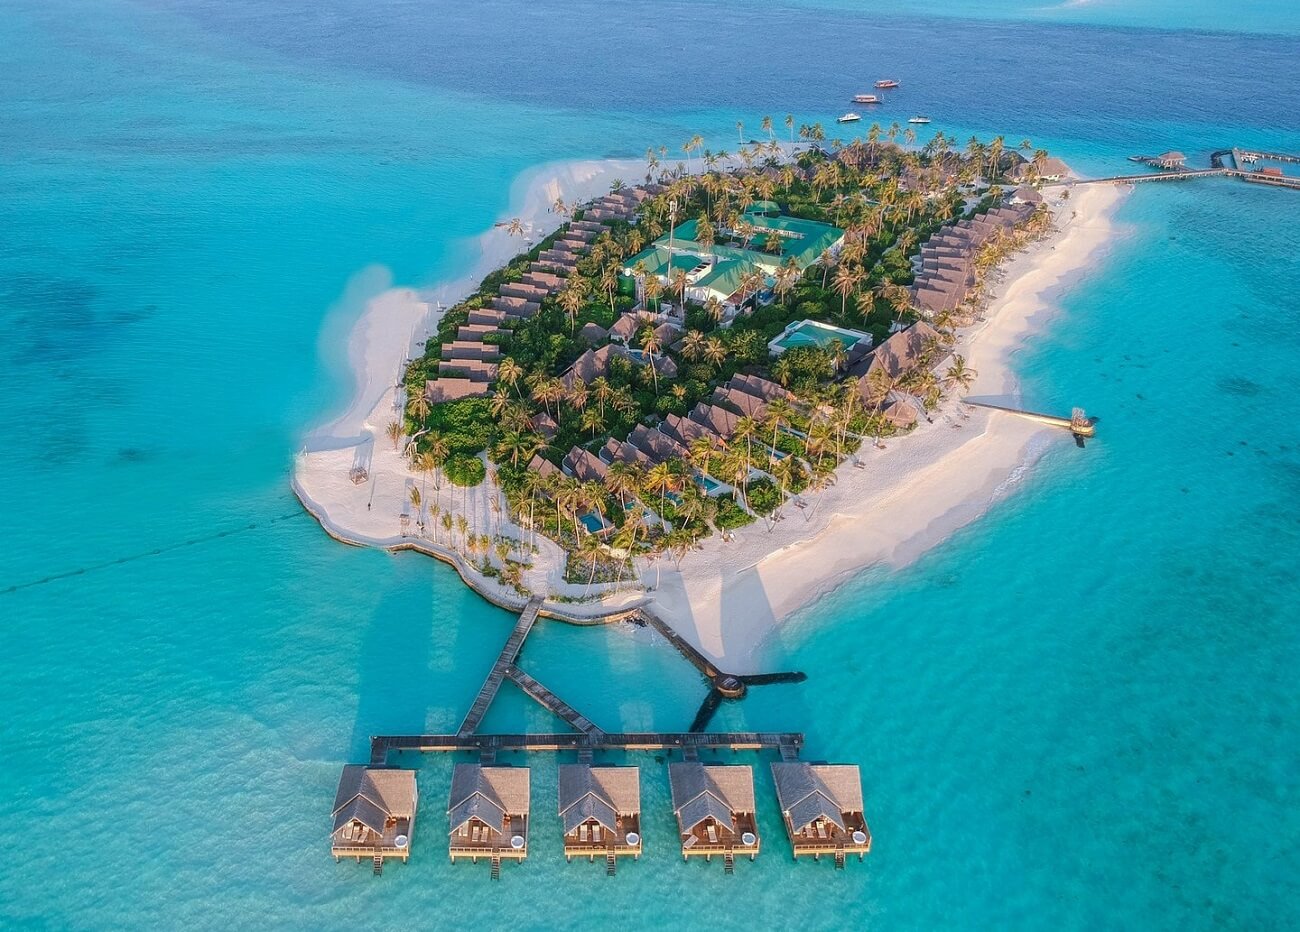 Hotels in Lhaviyani atoll in the Maldives: top 10